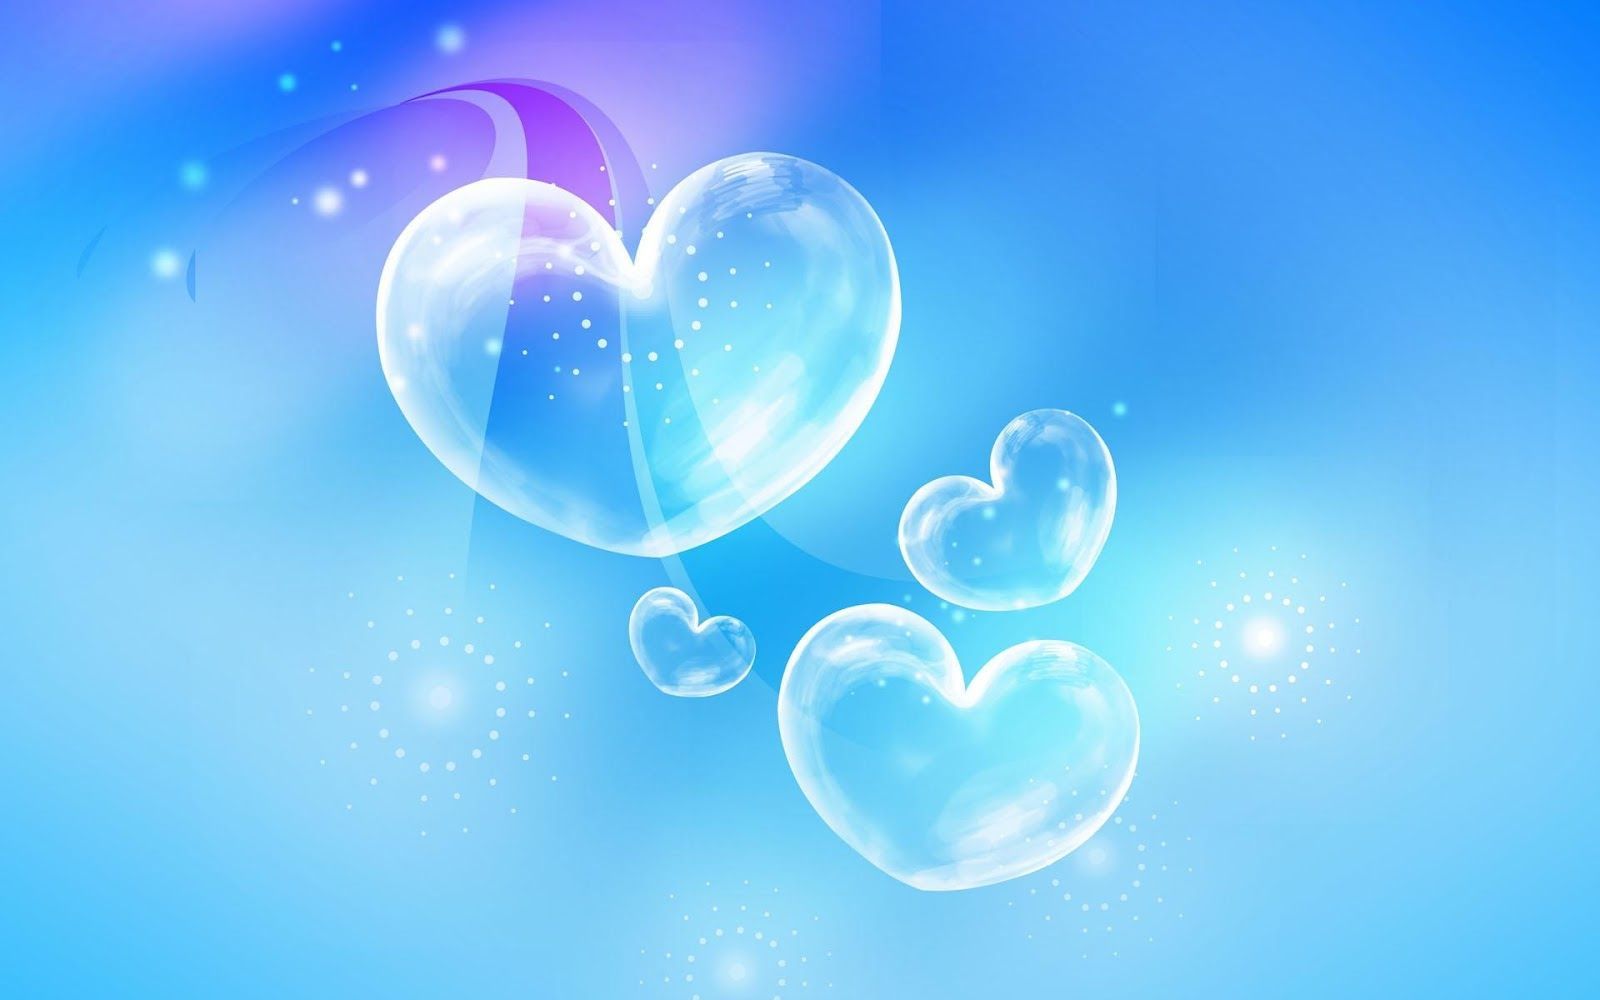 Love Wallpapers | Live HD Wallpaper HQ Pictures, Images, Photos ...